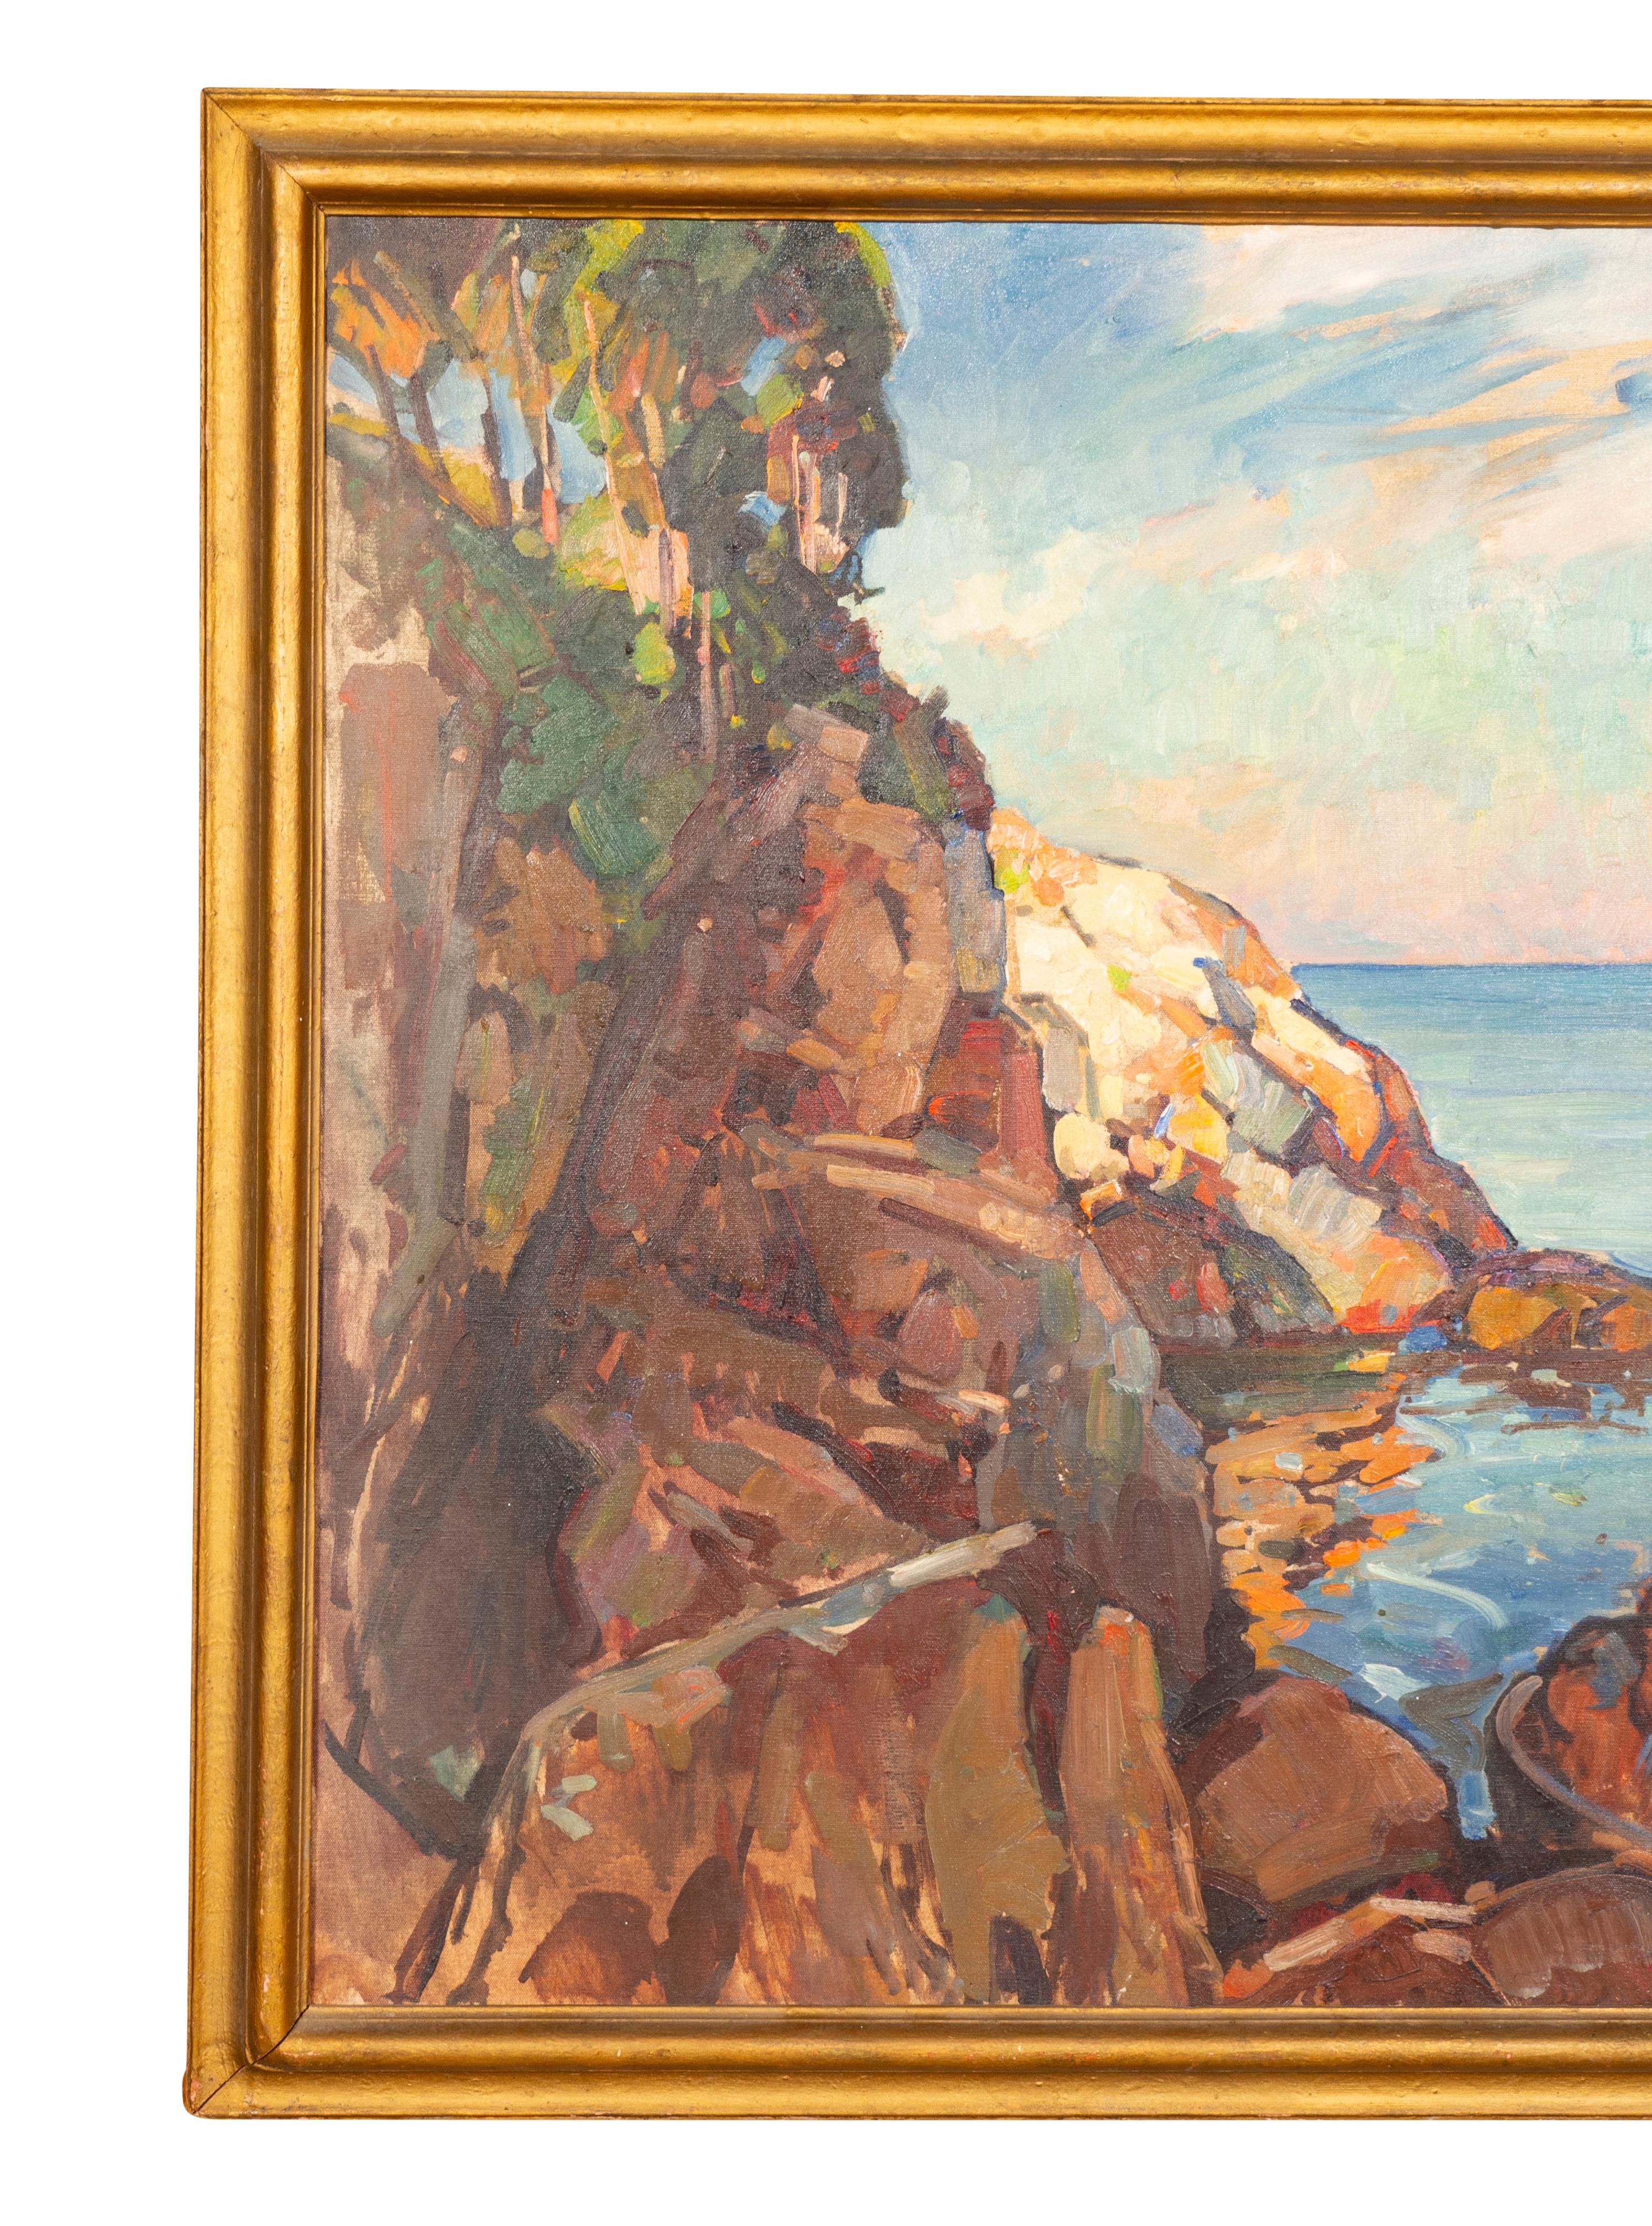 Large seascape with cove and ship. Either Gloucester Mass or coastal Maine. Well rendered and showing a rocky cove with trees ,ocean etc. Lester Stevens 1888-1969 is a well noted 
American painter. Scuffing to original frame. 